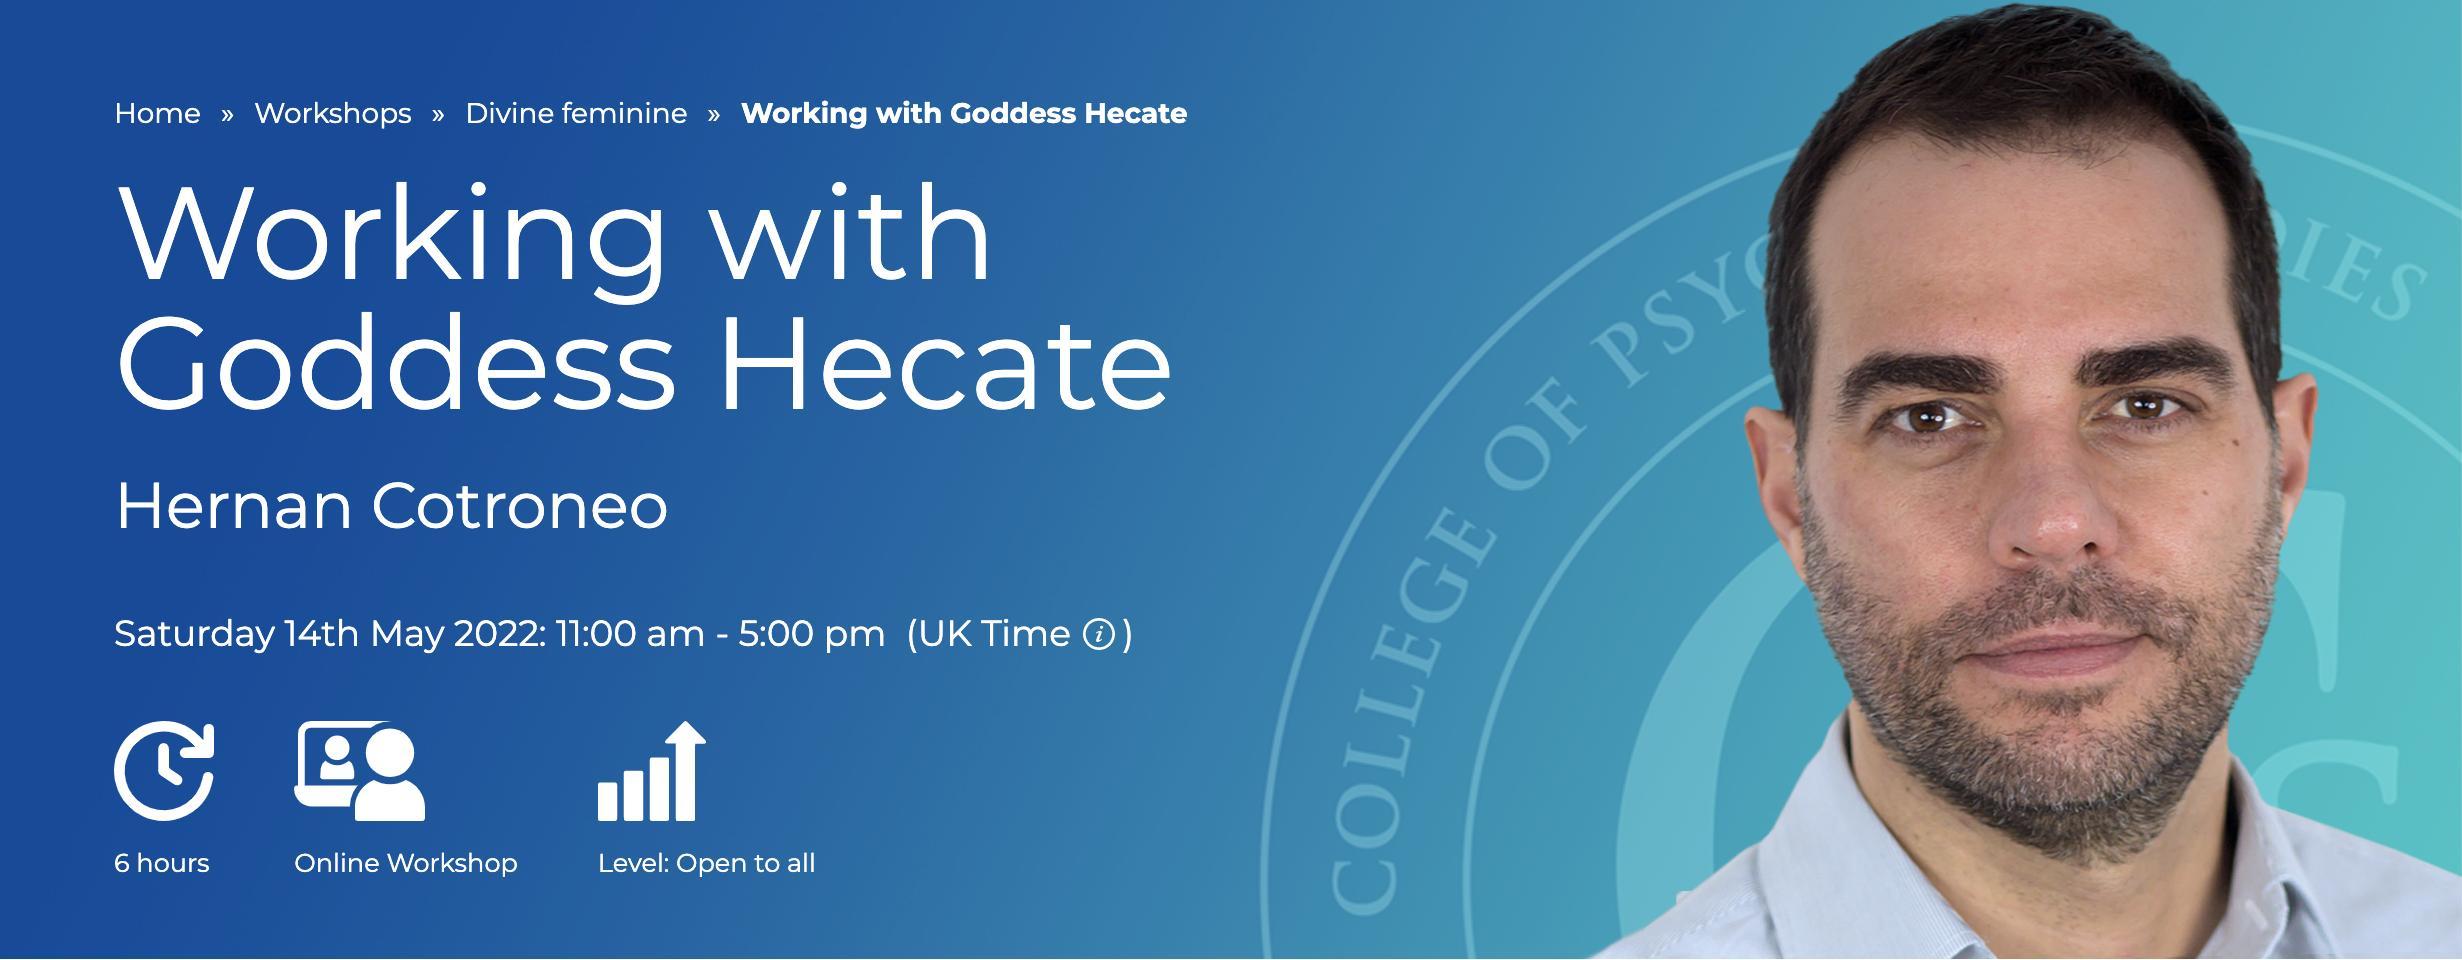 Working with Goddess Hecate